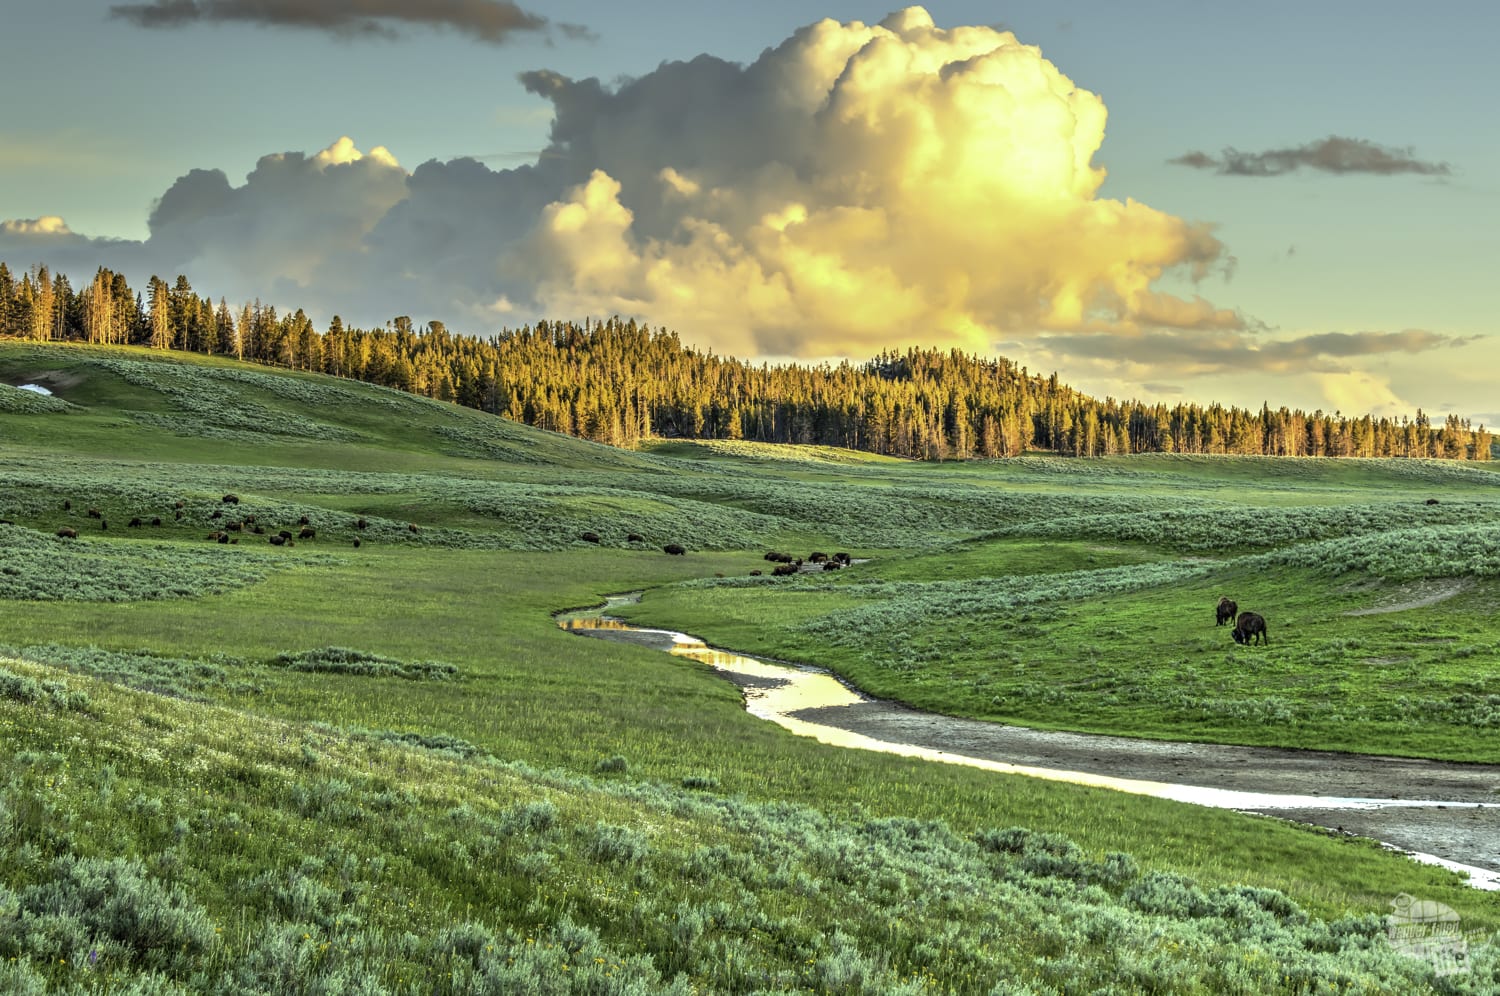 Great views are all around in Yellowstone.